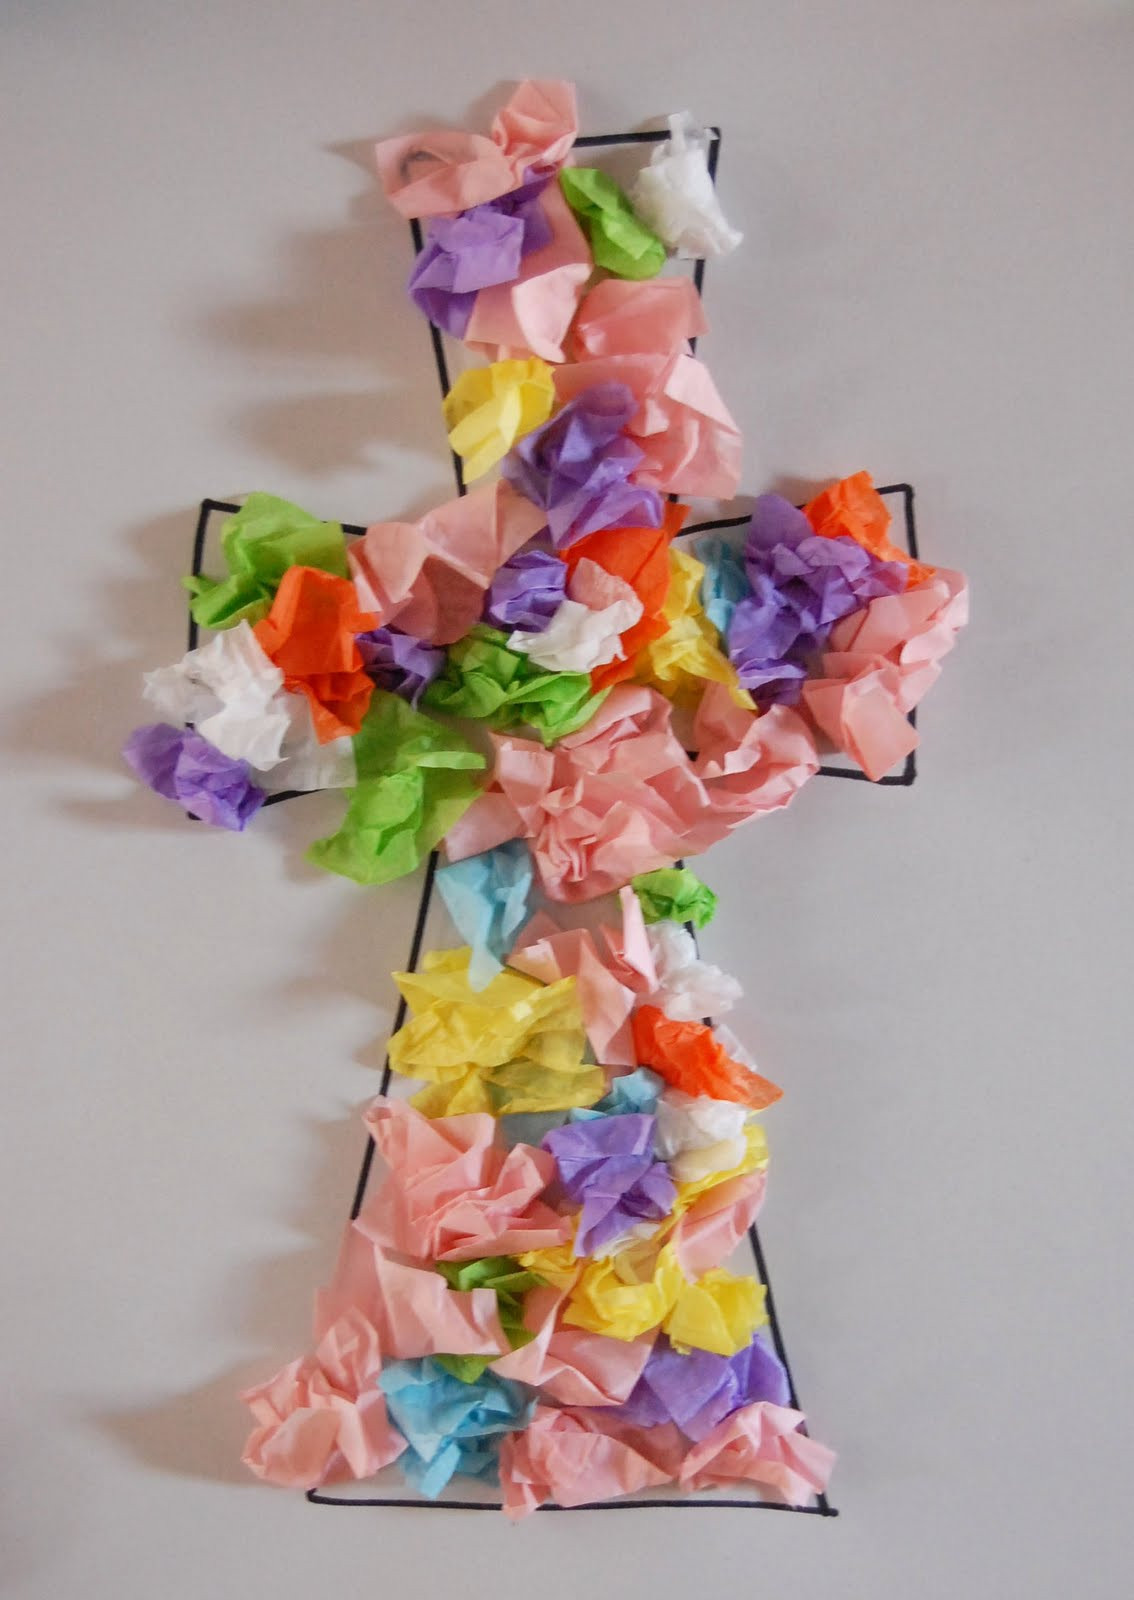 Religious Easter Crafts For Preschoolers
 In Light of the Truth Preschool Craft Easter Cross